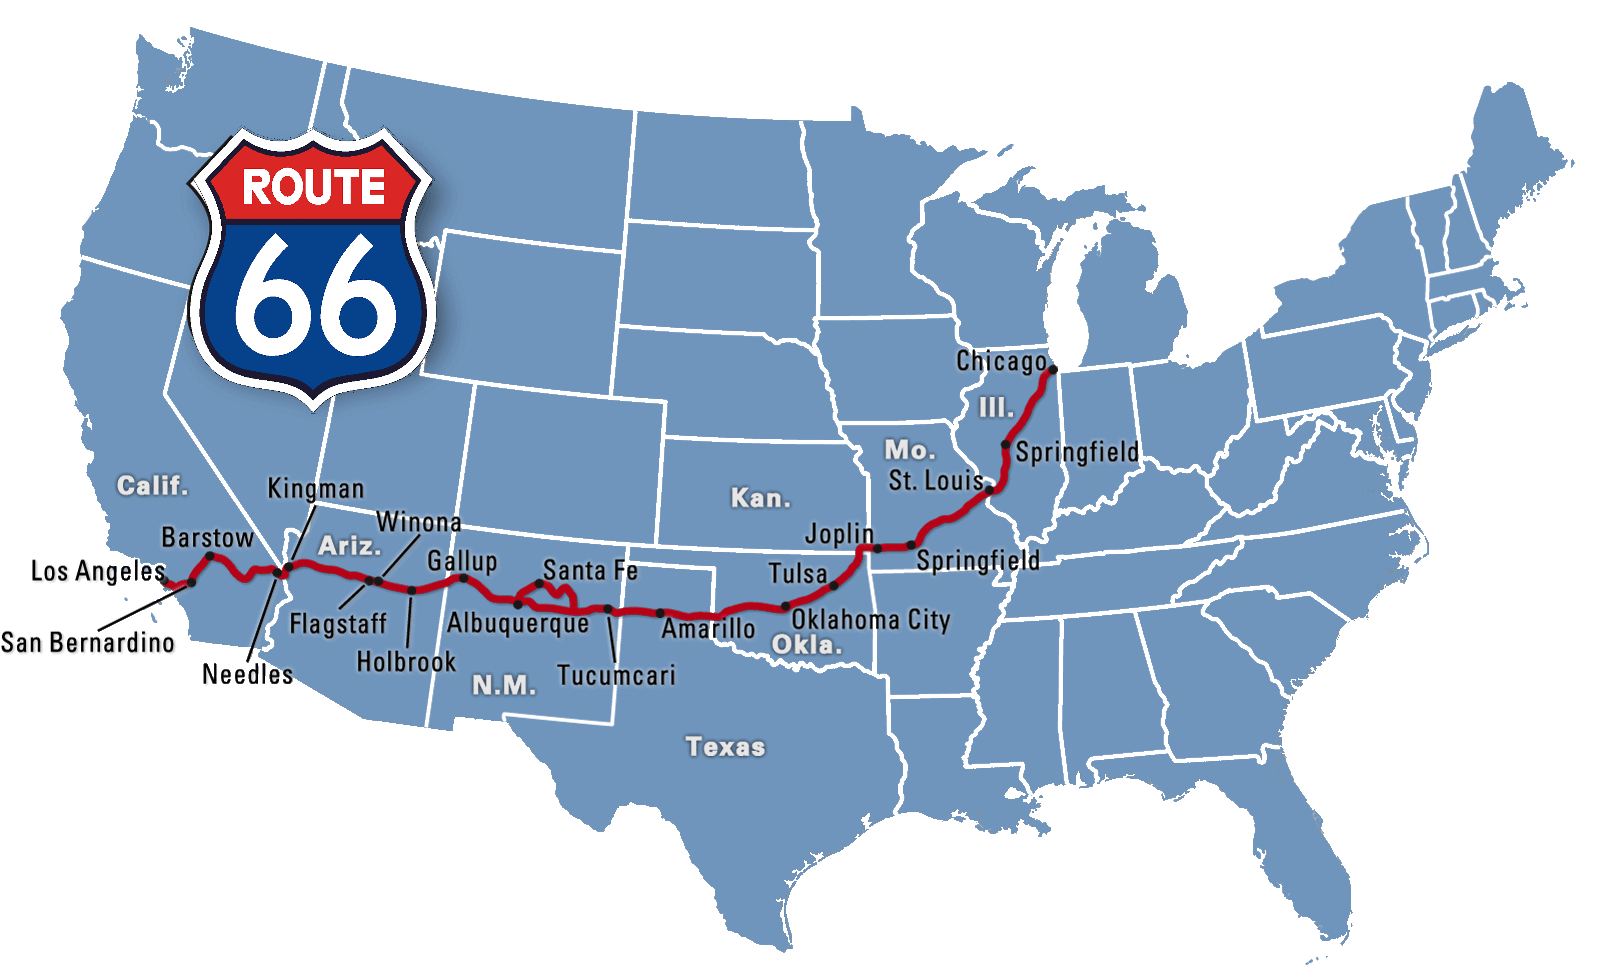 Ultimate fire link route 66